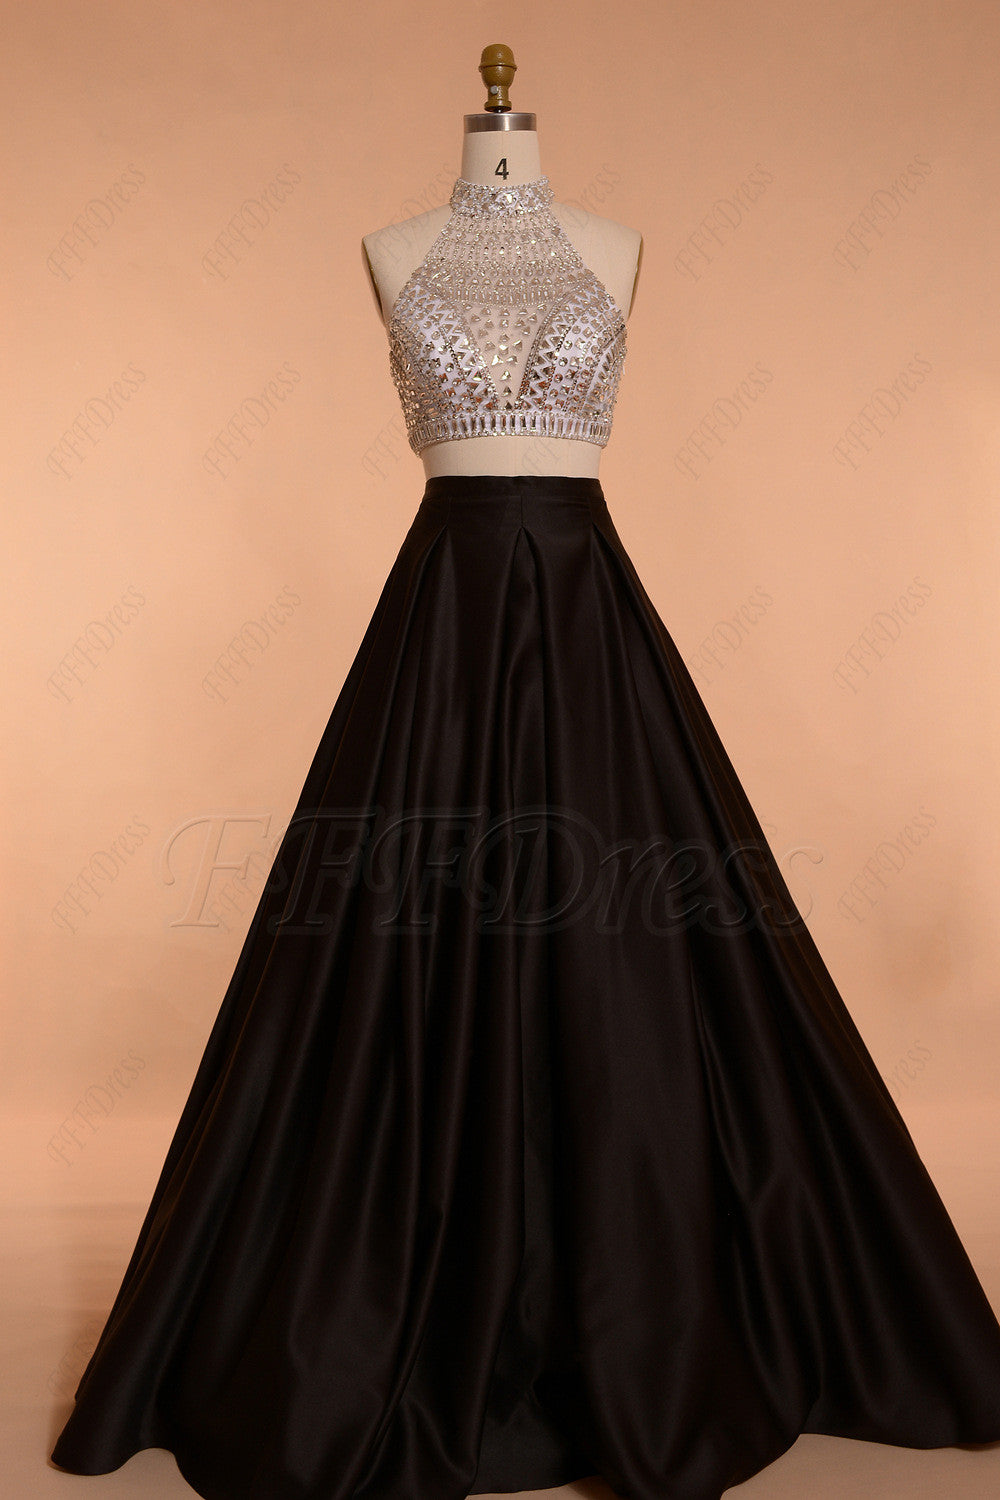 Crystal Beaded Two Piece Prom Dress black and White Ball Gown